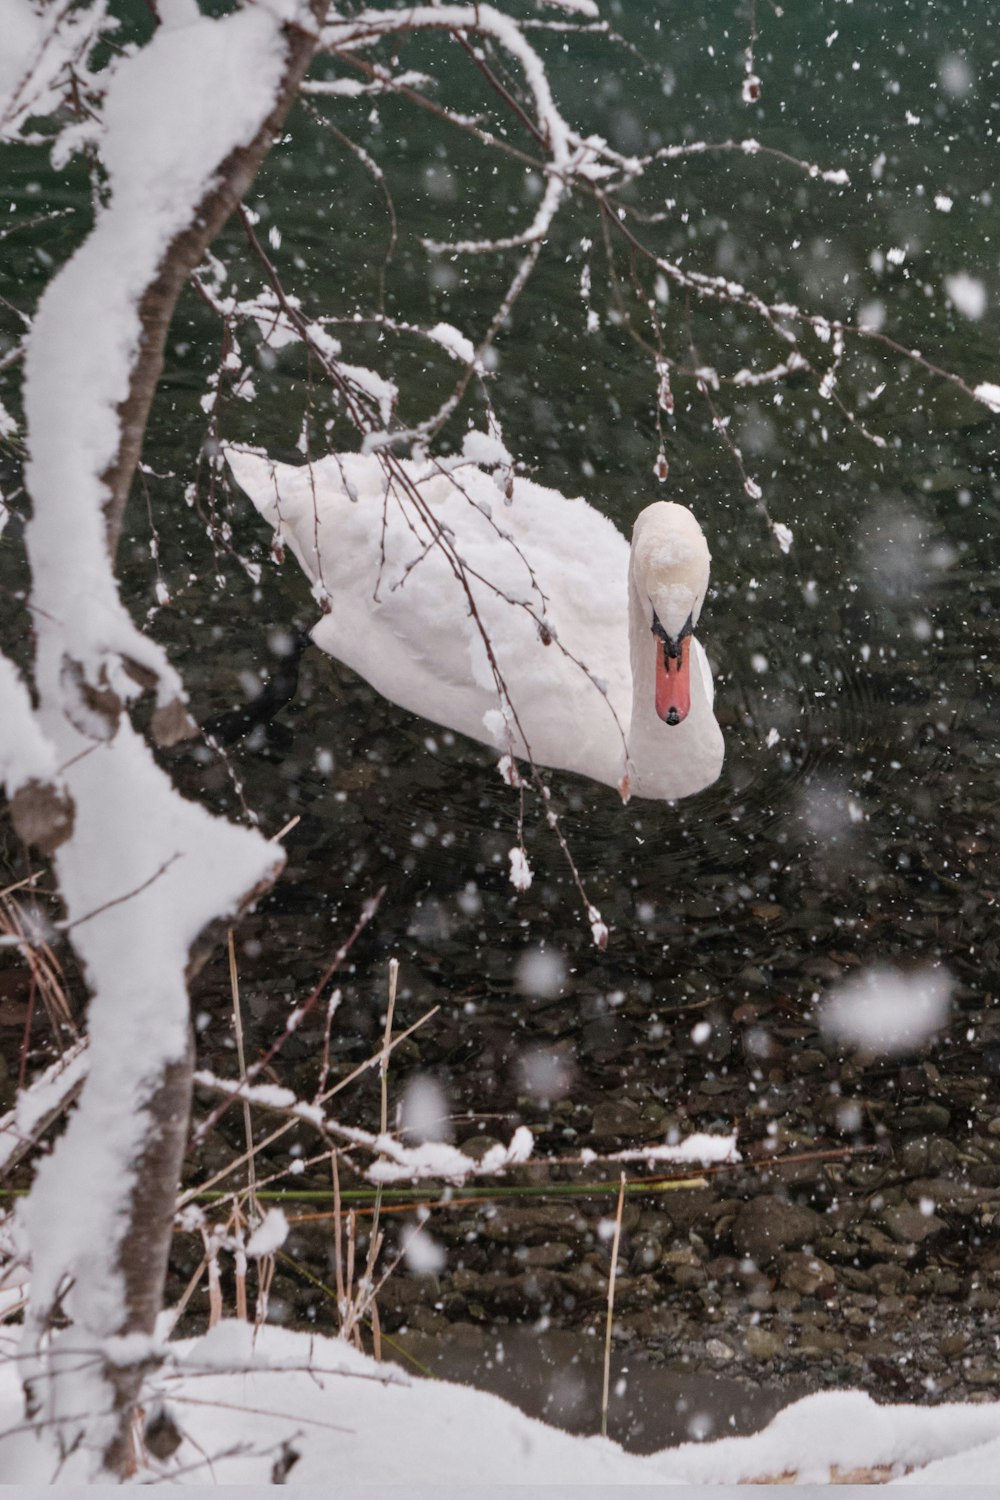 white swan on snow covered ground during daytime